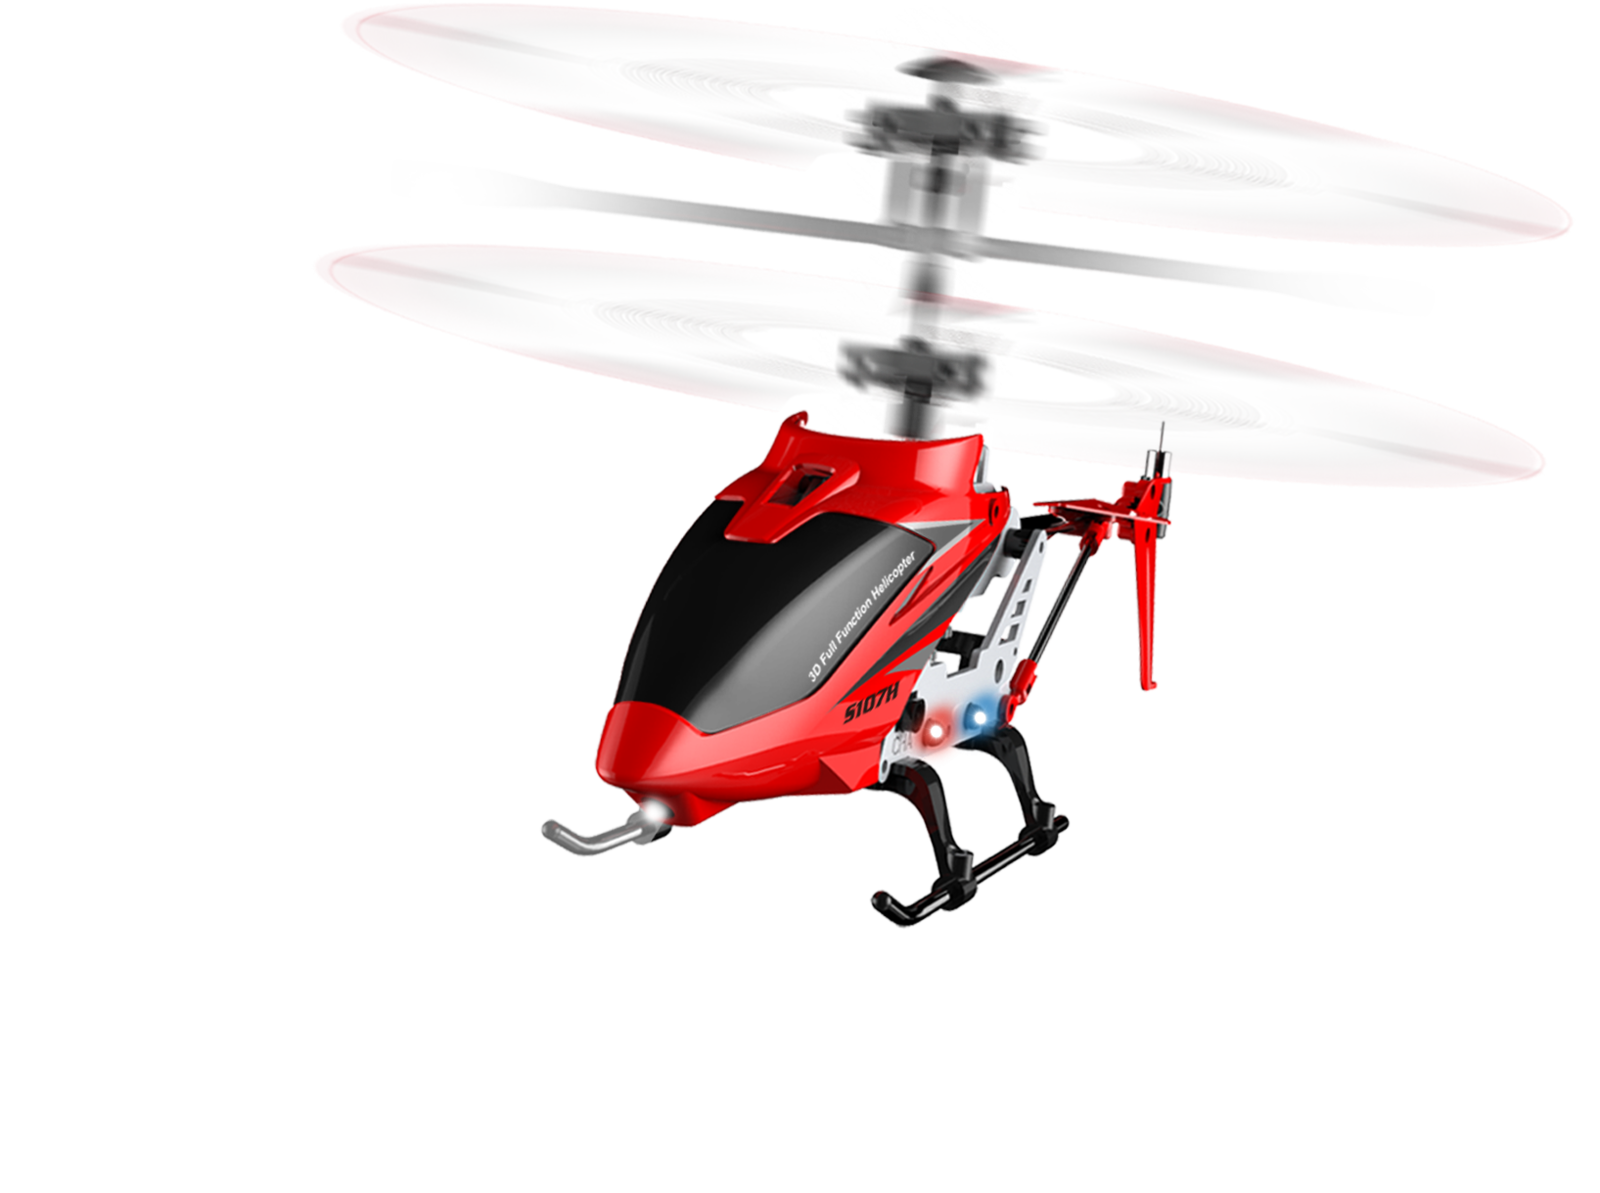 Syma Helicopter 2.4g altitude hold function S107H